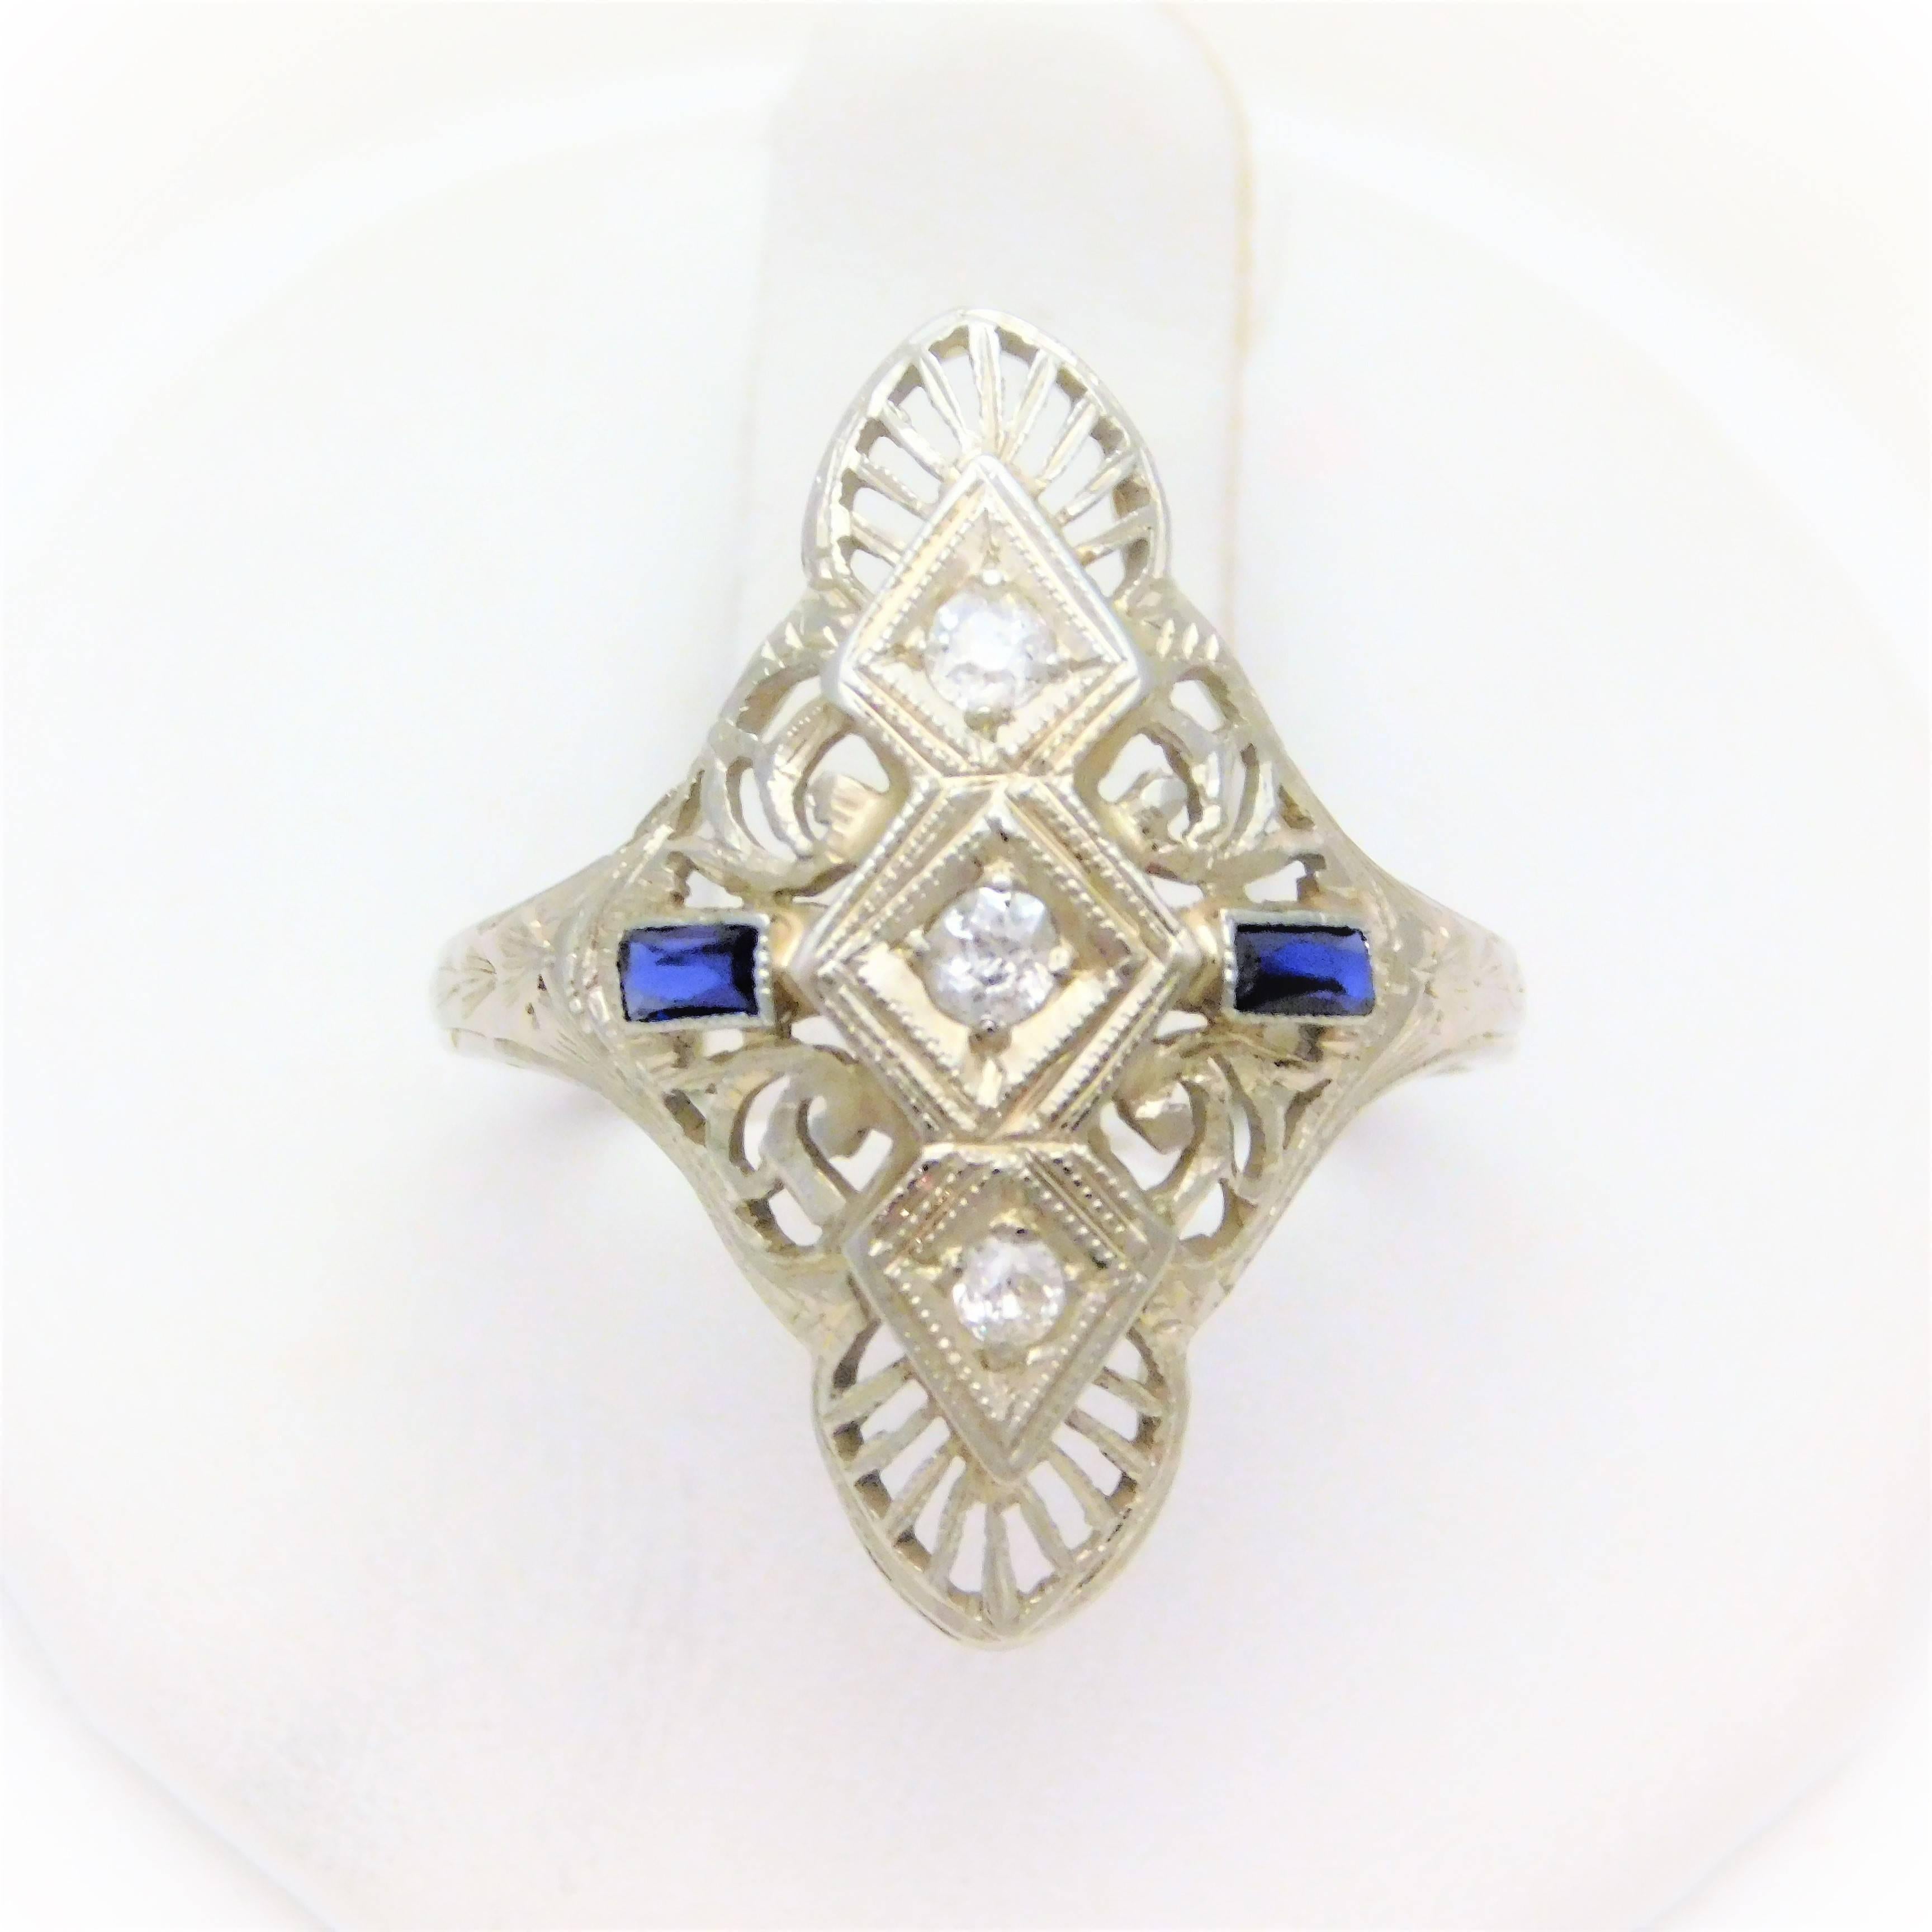 From a lovely New Orleans estate.  Circa Early 20th Century.  The shield ring design was one of the most popular designs from 1900-1930.  This beautiful example has been hand crafted in solid 18k white gold.  It has been masterfully jeweled with